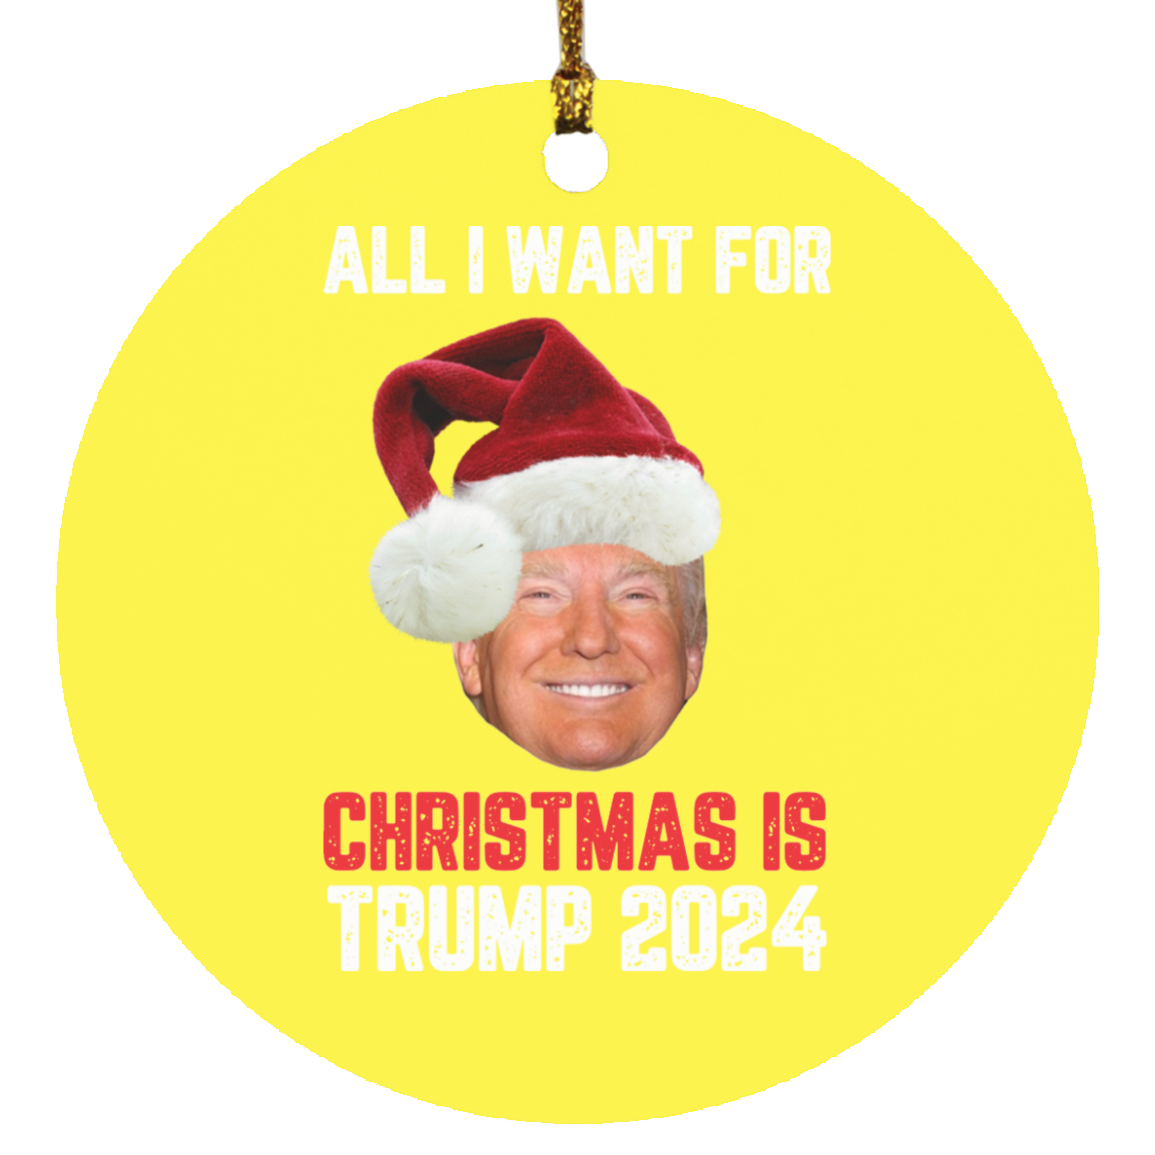 Trump Ornament Want For Christmas